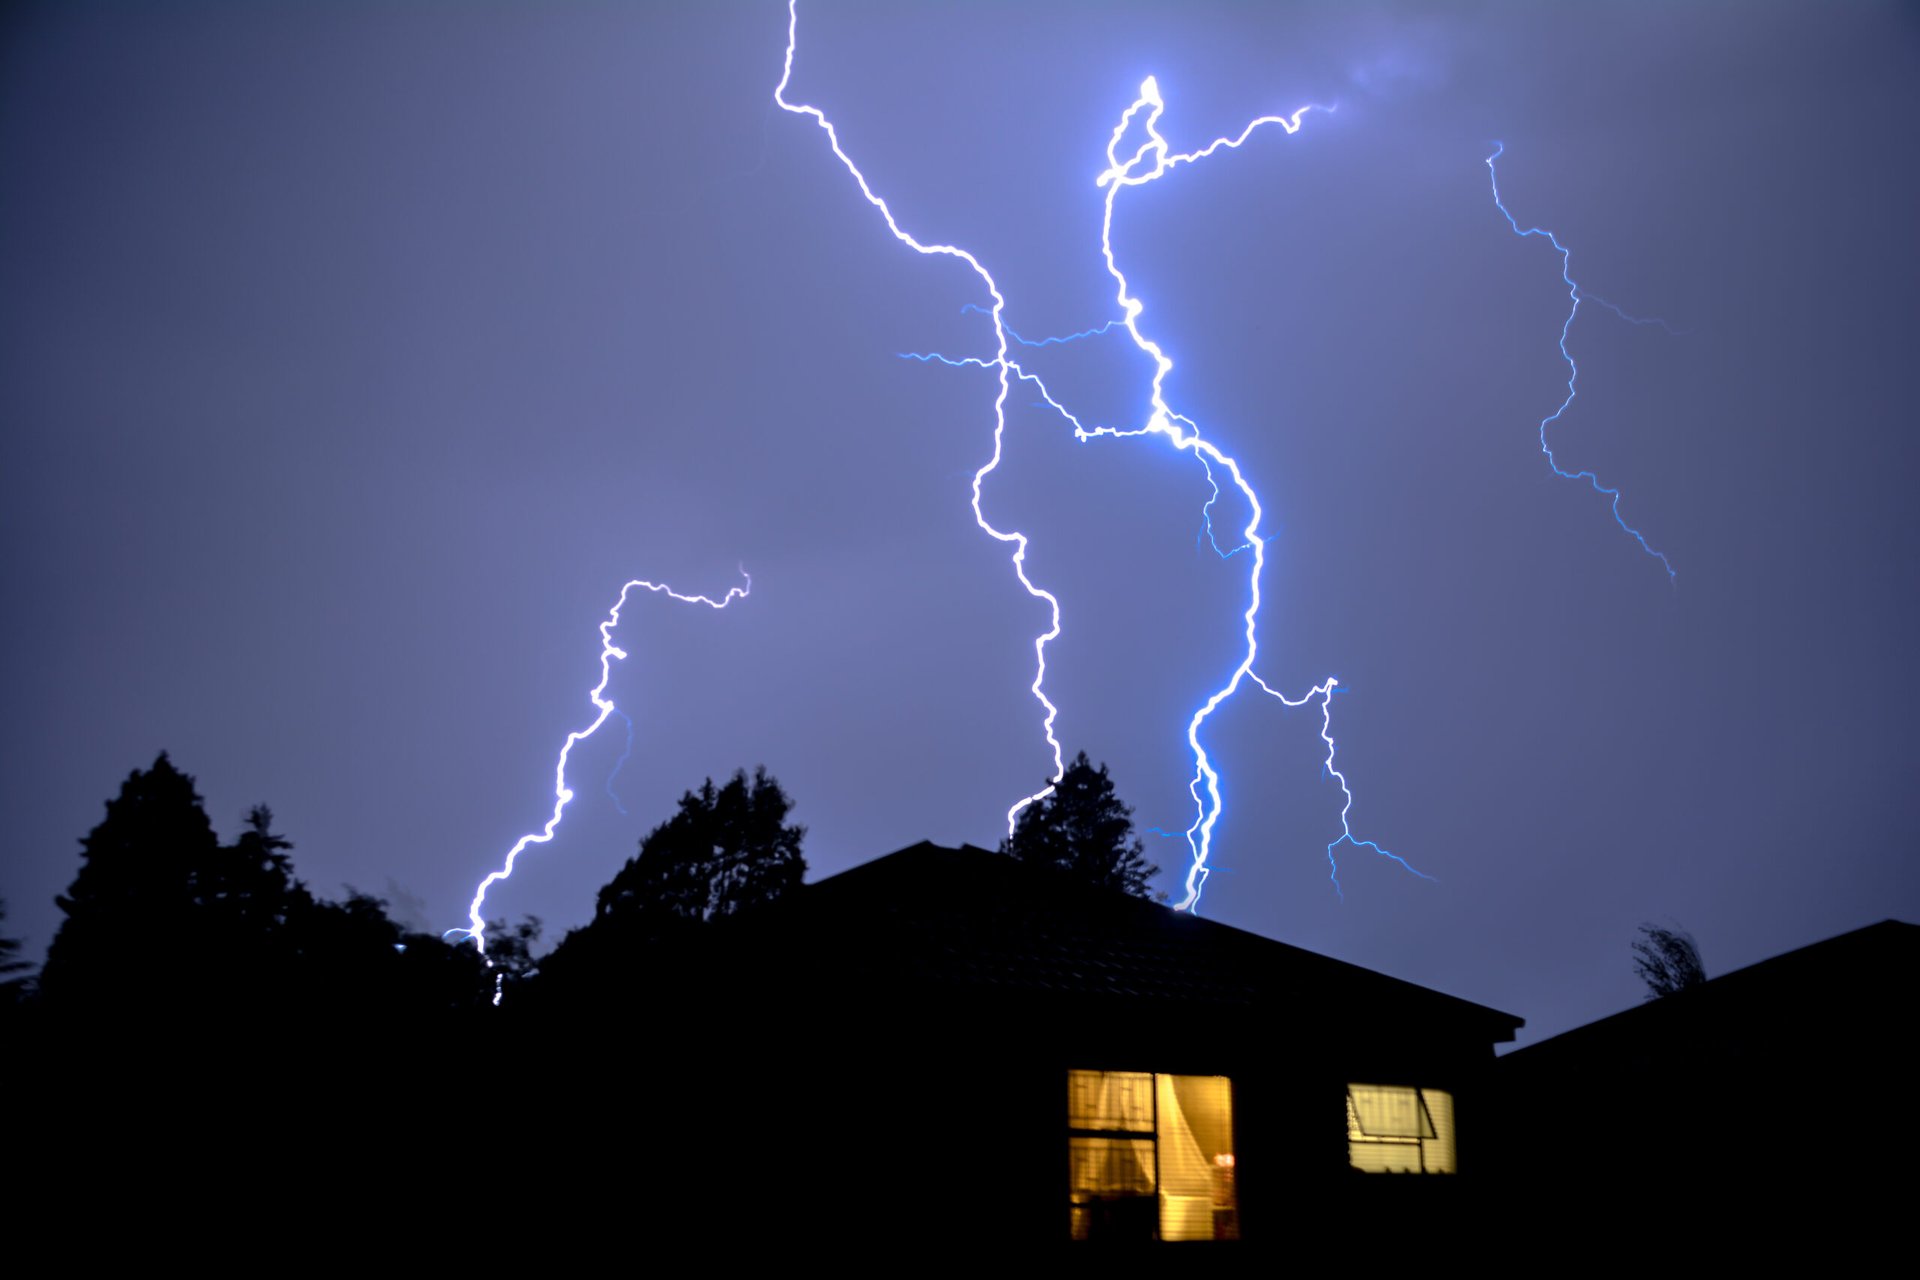 Lightning above a house during a thunderstorm